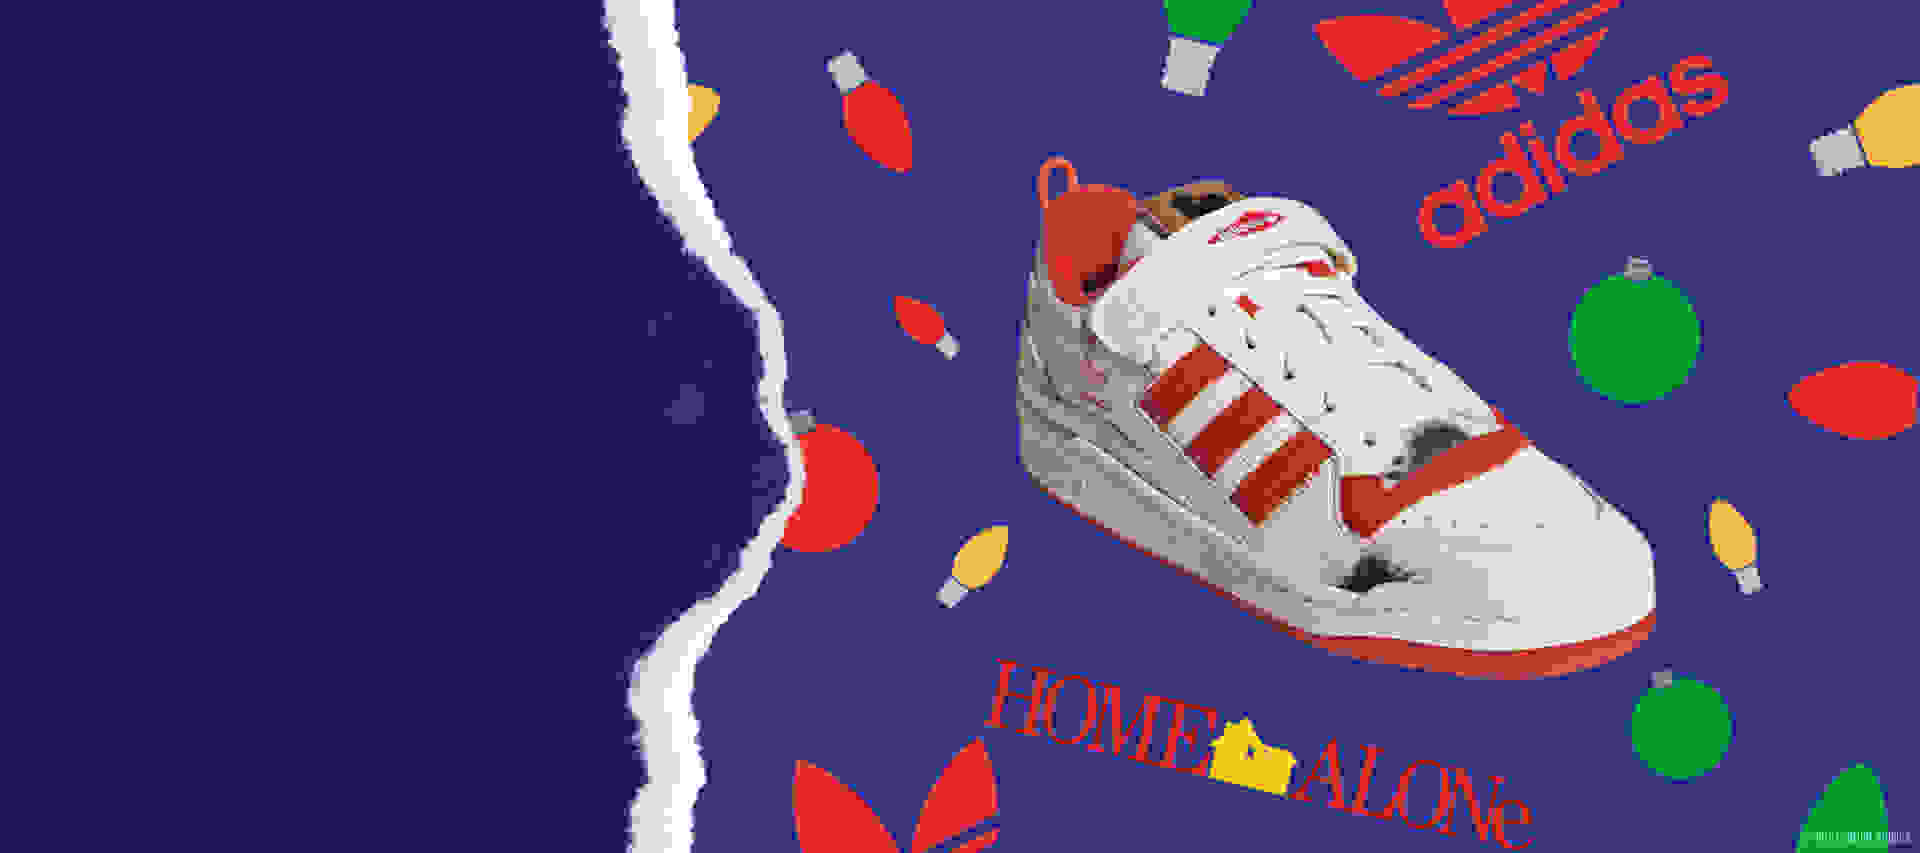 A close-up of the shoe with a white upper, printed burn marks and red logos, Three Stripes, lining and outsole on festive wrapping paper.